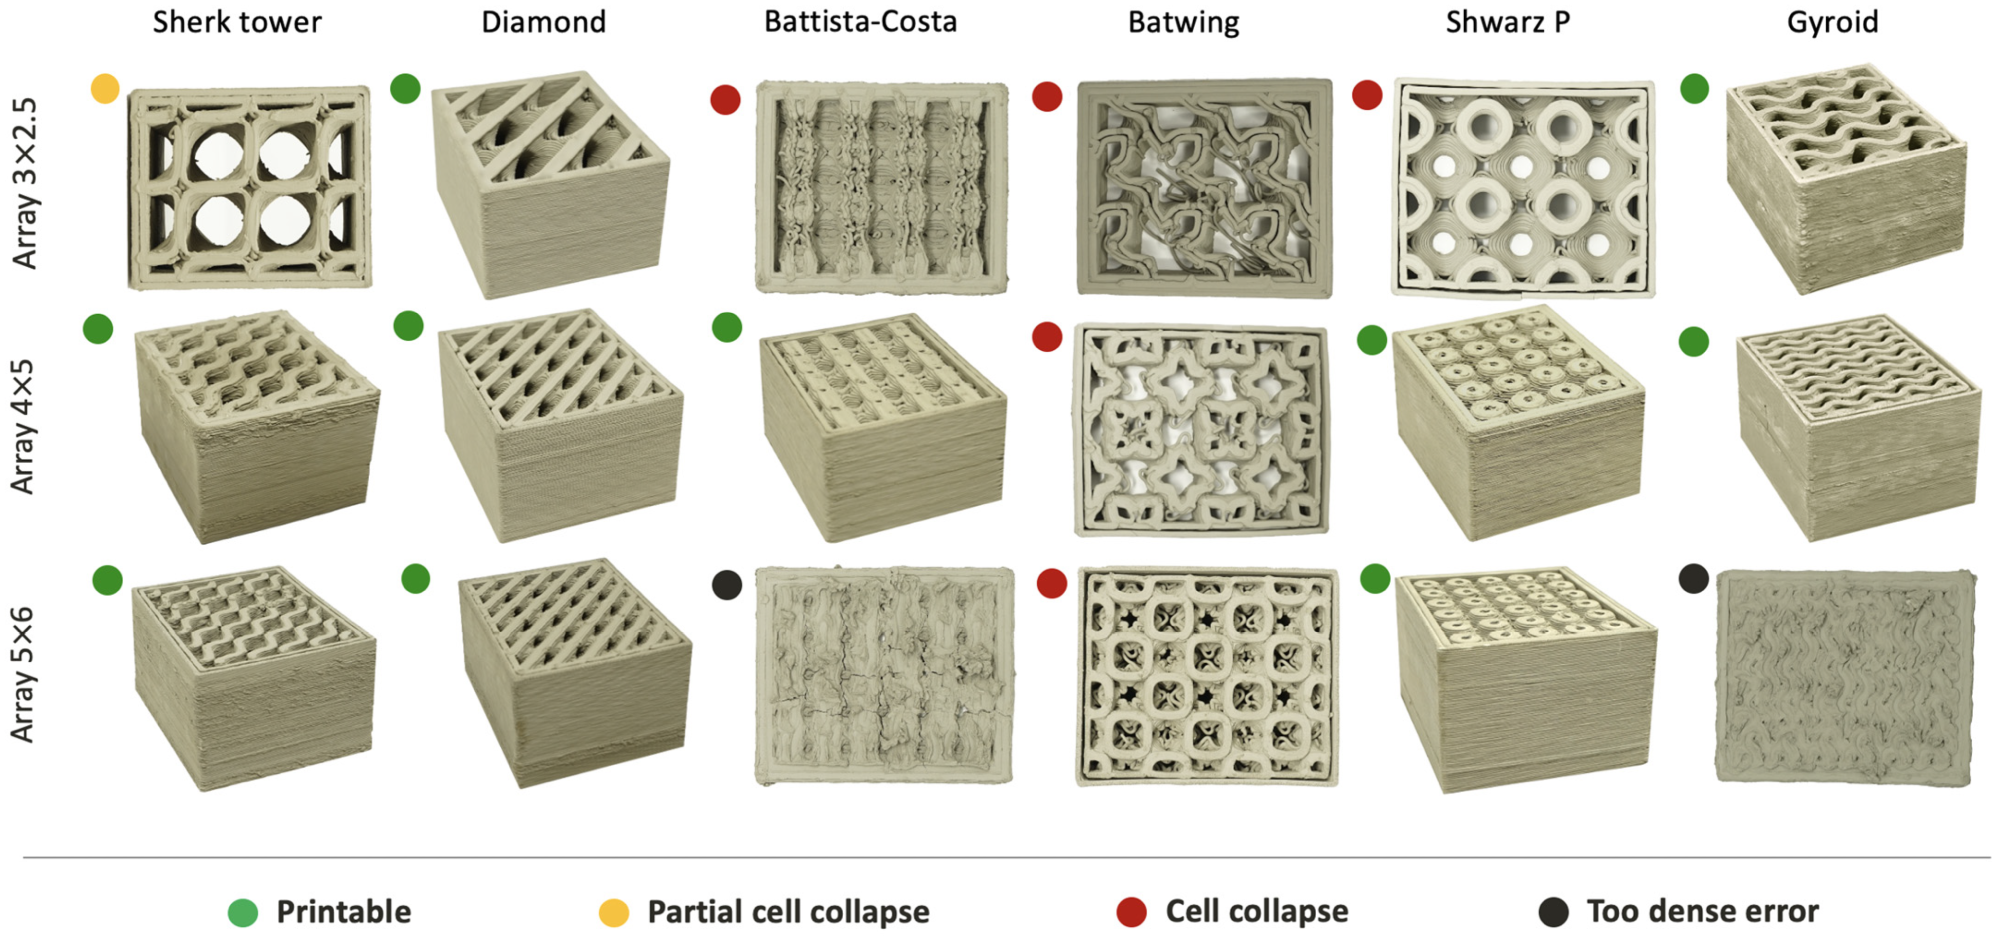 Prototyping and 3D printing of the 18 bricks and specification of the results in terms of too dense error, collapse, partial cell collapse, and perfectly printable.